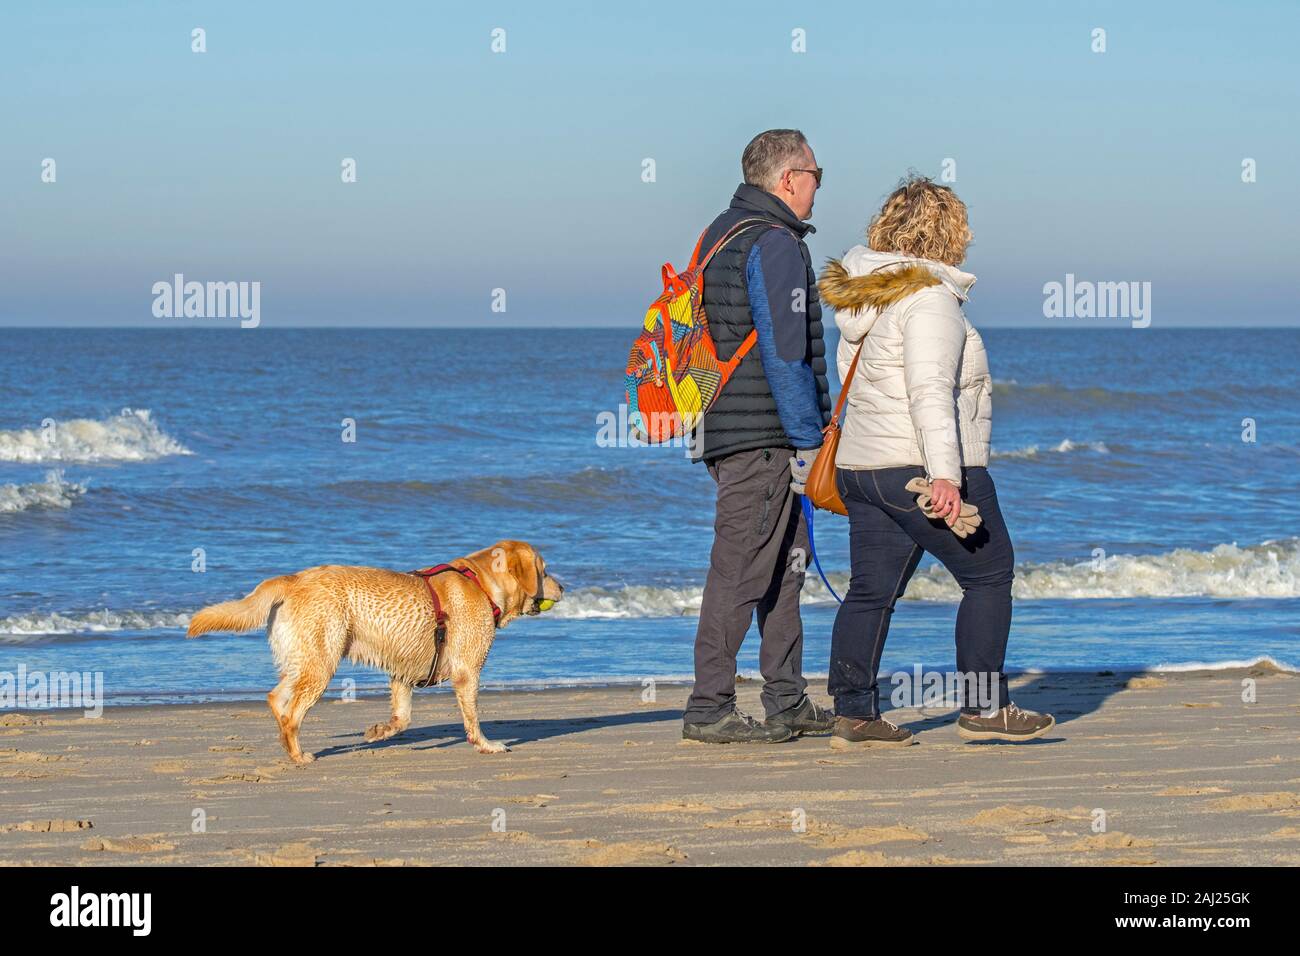 Unleashed blonde labrador retriever wearing dog harness and following owners walking on the beach with tennis ball in mouth for playing fetch Stock Photo